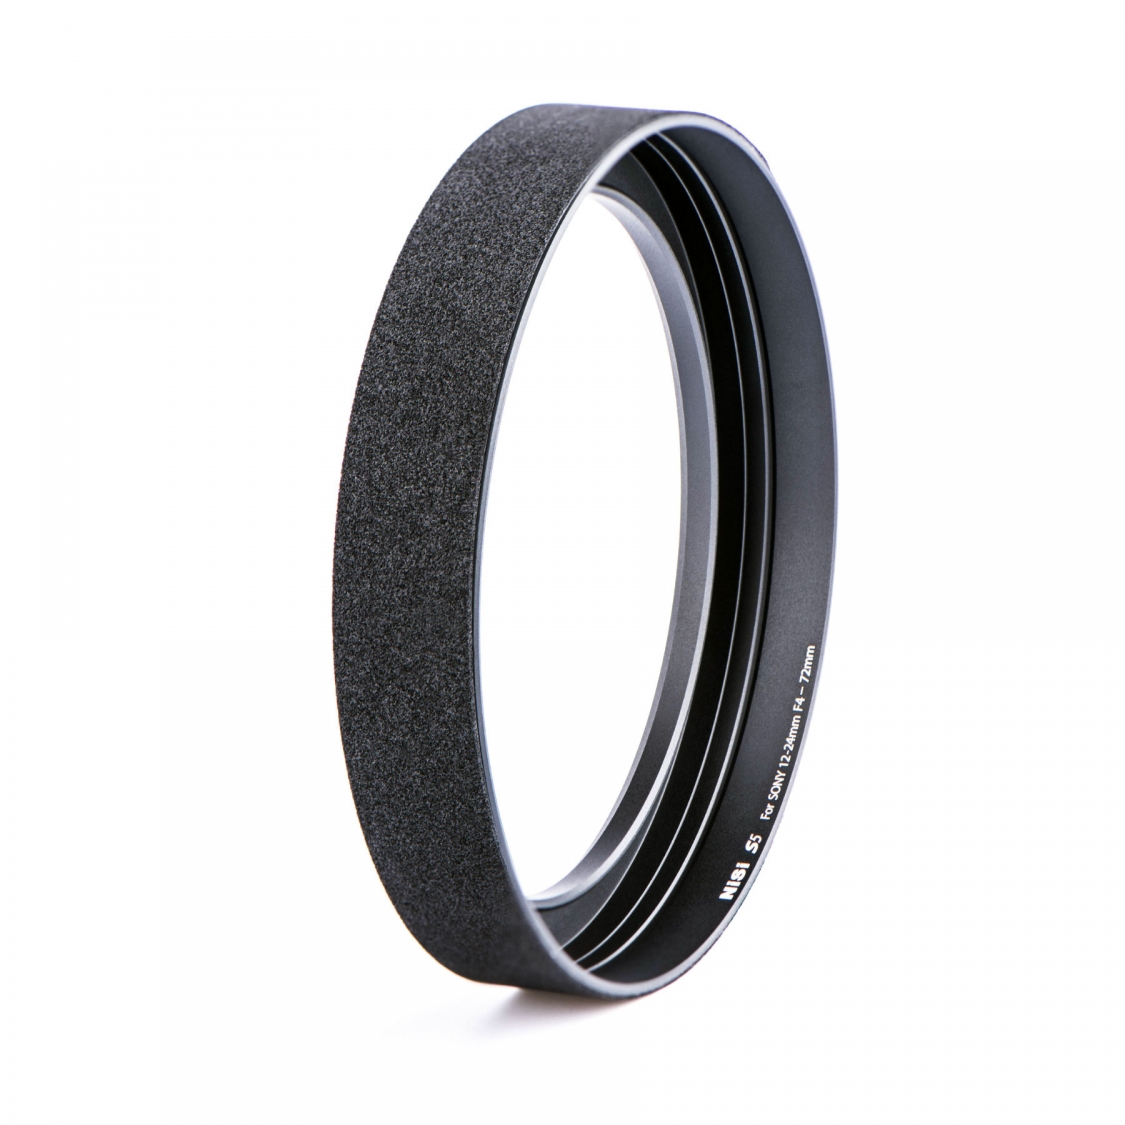 NiSi 82mm Filter Adapter Ring for S5 (Sigma 14mm f1.8 DG)